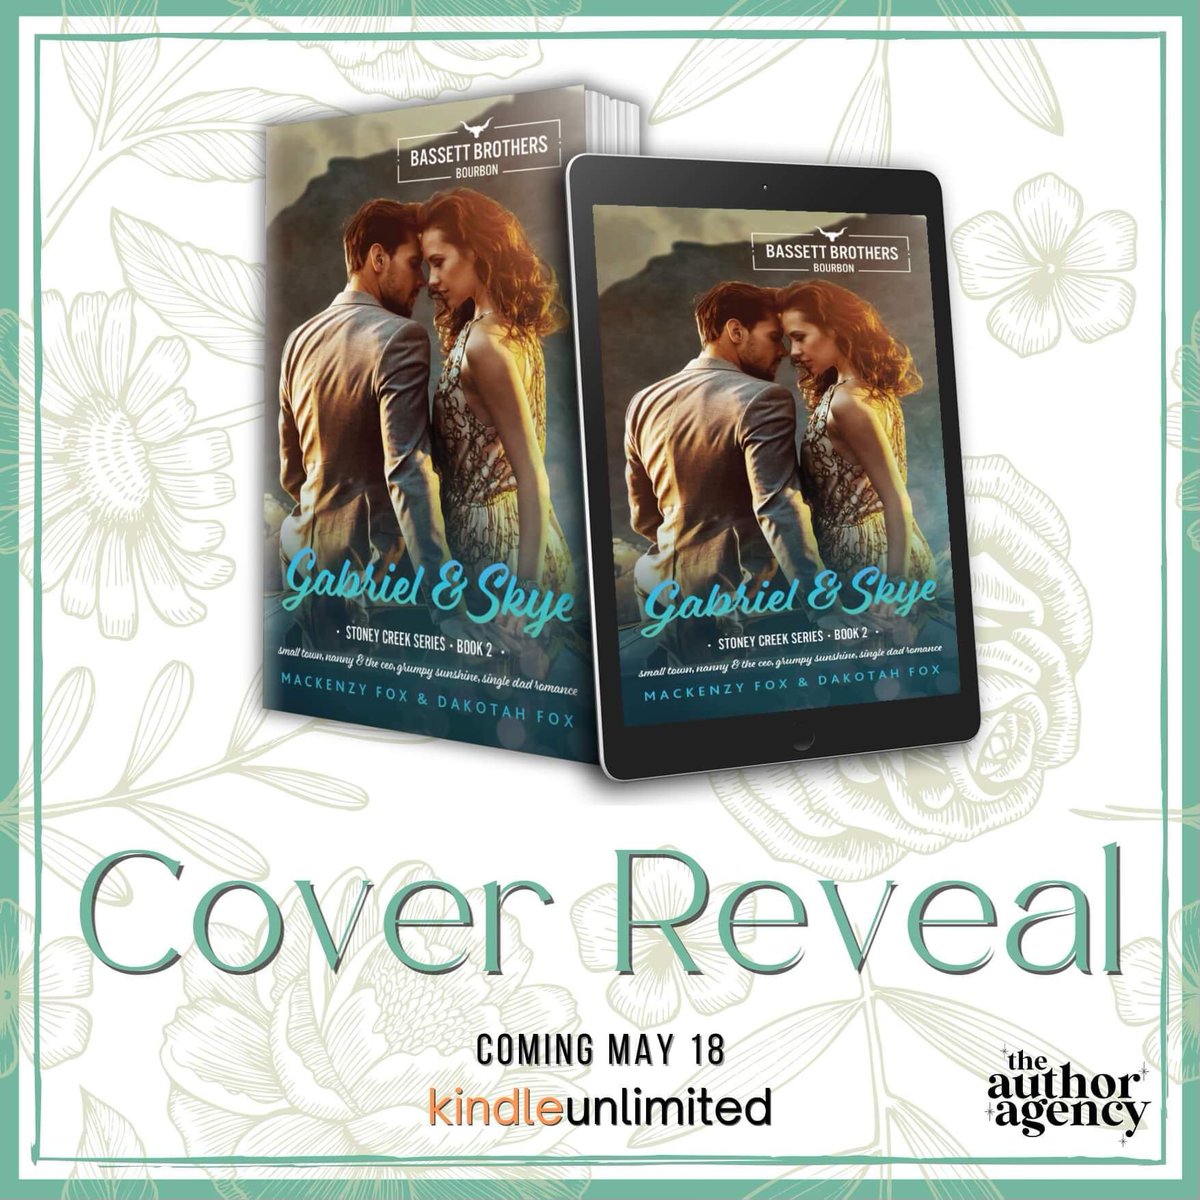 ✨Check out this cover:
GABRIEL & SKYE releasing May 18th! 
This is a small town, single dad, nanny romance with his best friend’s sister, the reformed playboy, and all the grumpy/sunshine vibes we love!
#PreOrderNow on Amazon!
#bookish #romancebooktok #mackenzyfox #dakotahfox